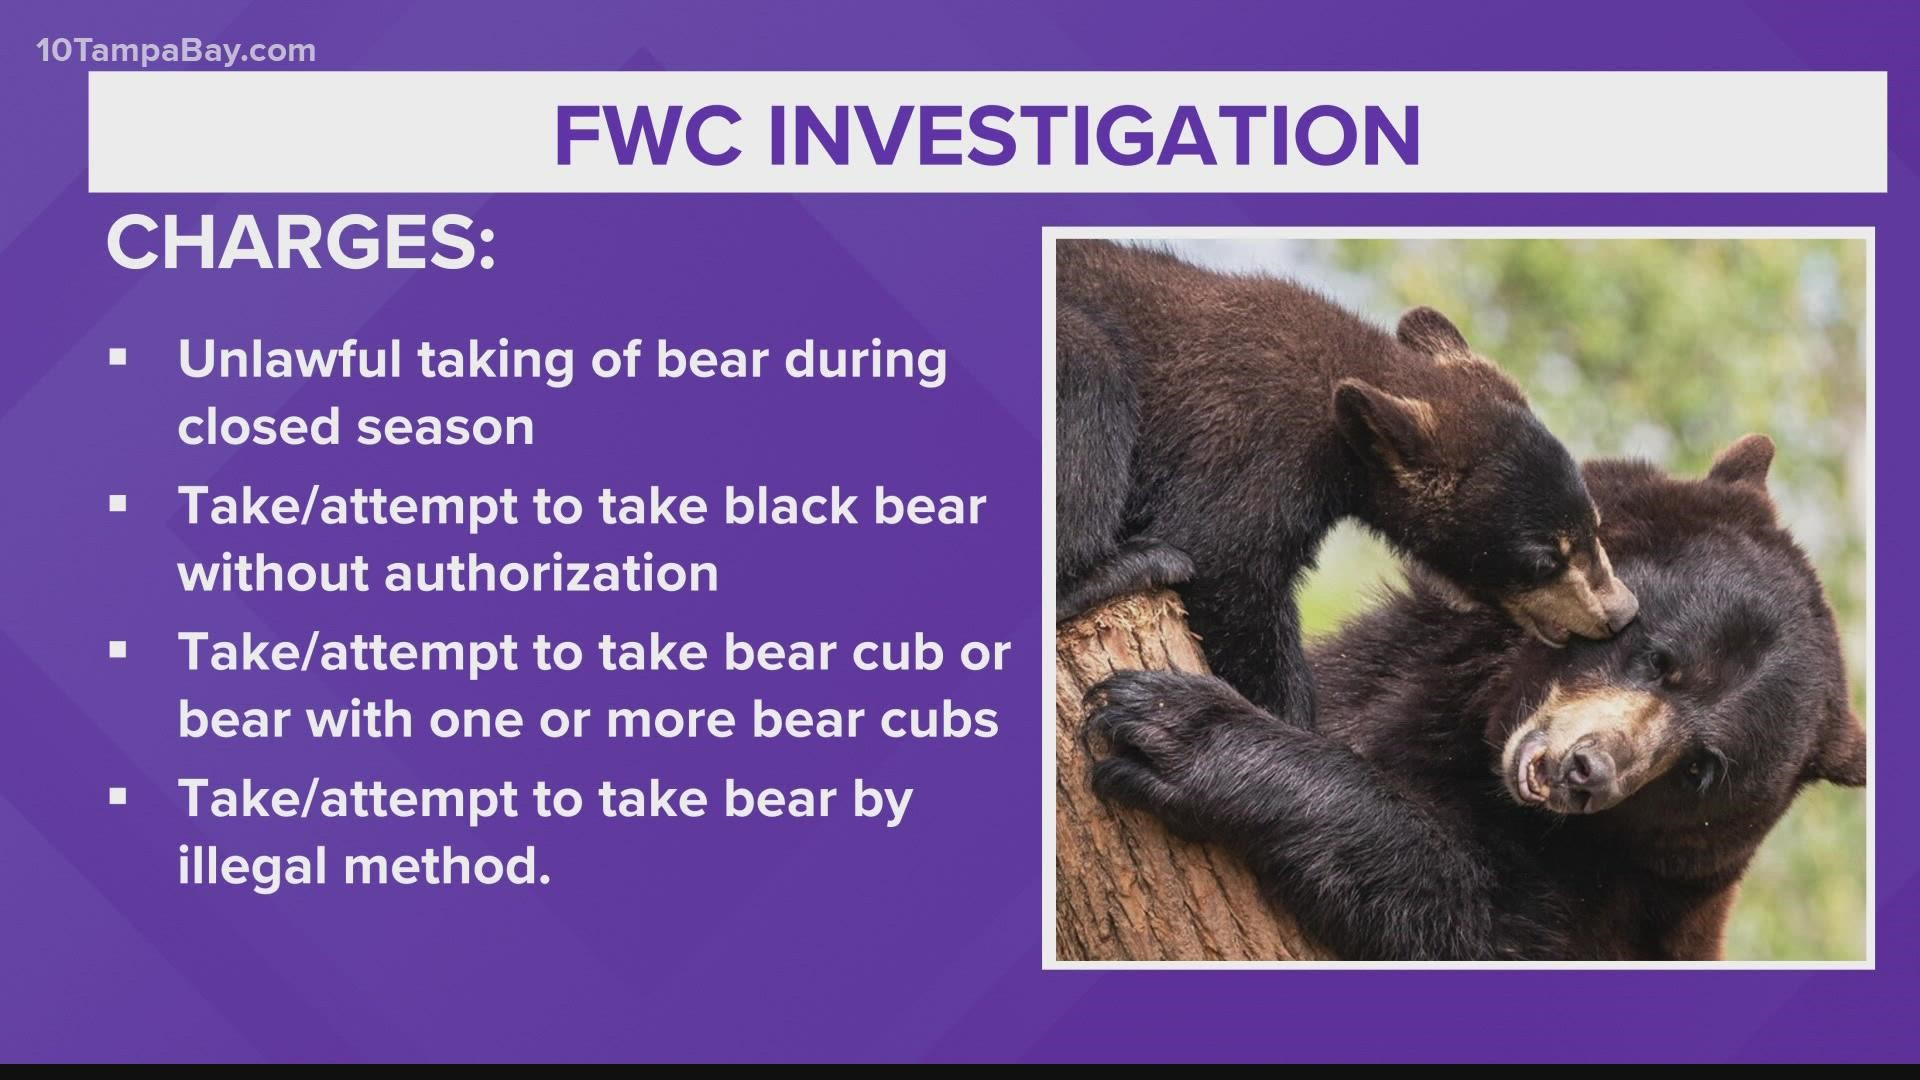 "The deliberate shooting of these two bears is unacceptable and will not be tolerated," the FWC said.